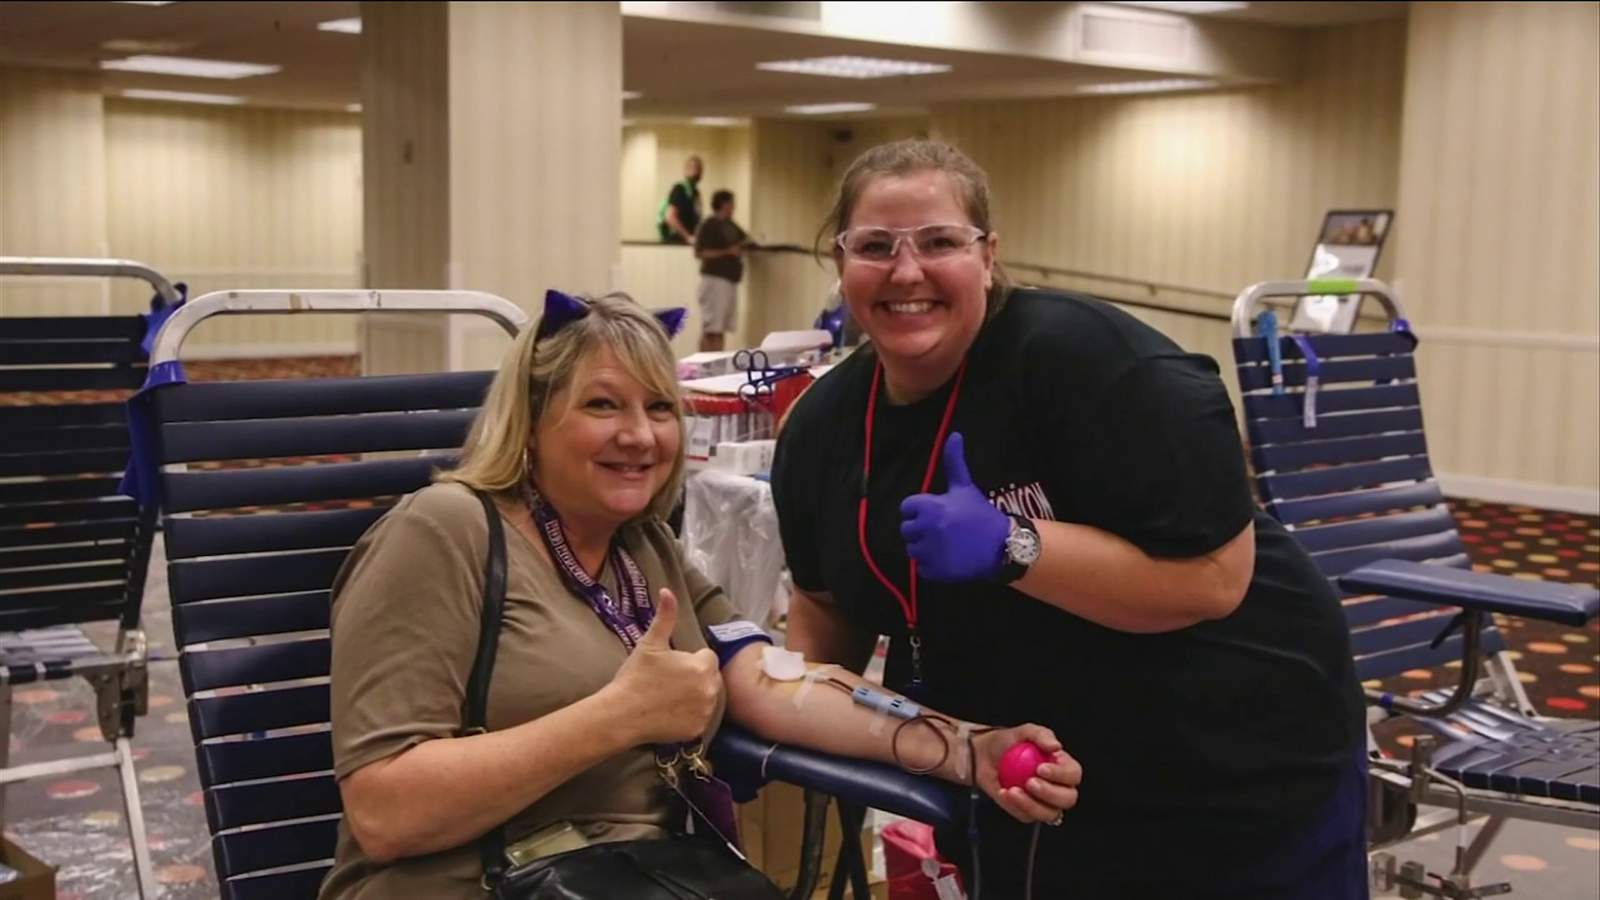 Emergency blood donations needed, LifeSouth says